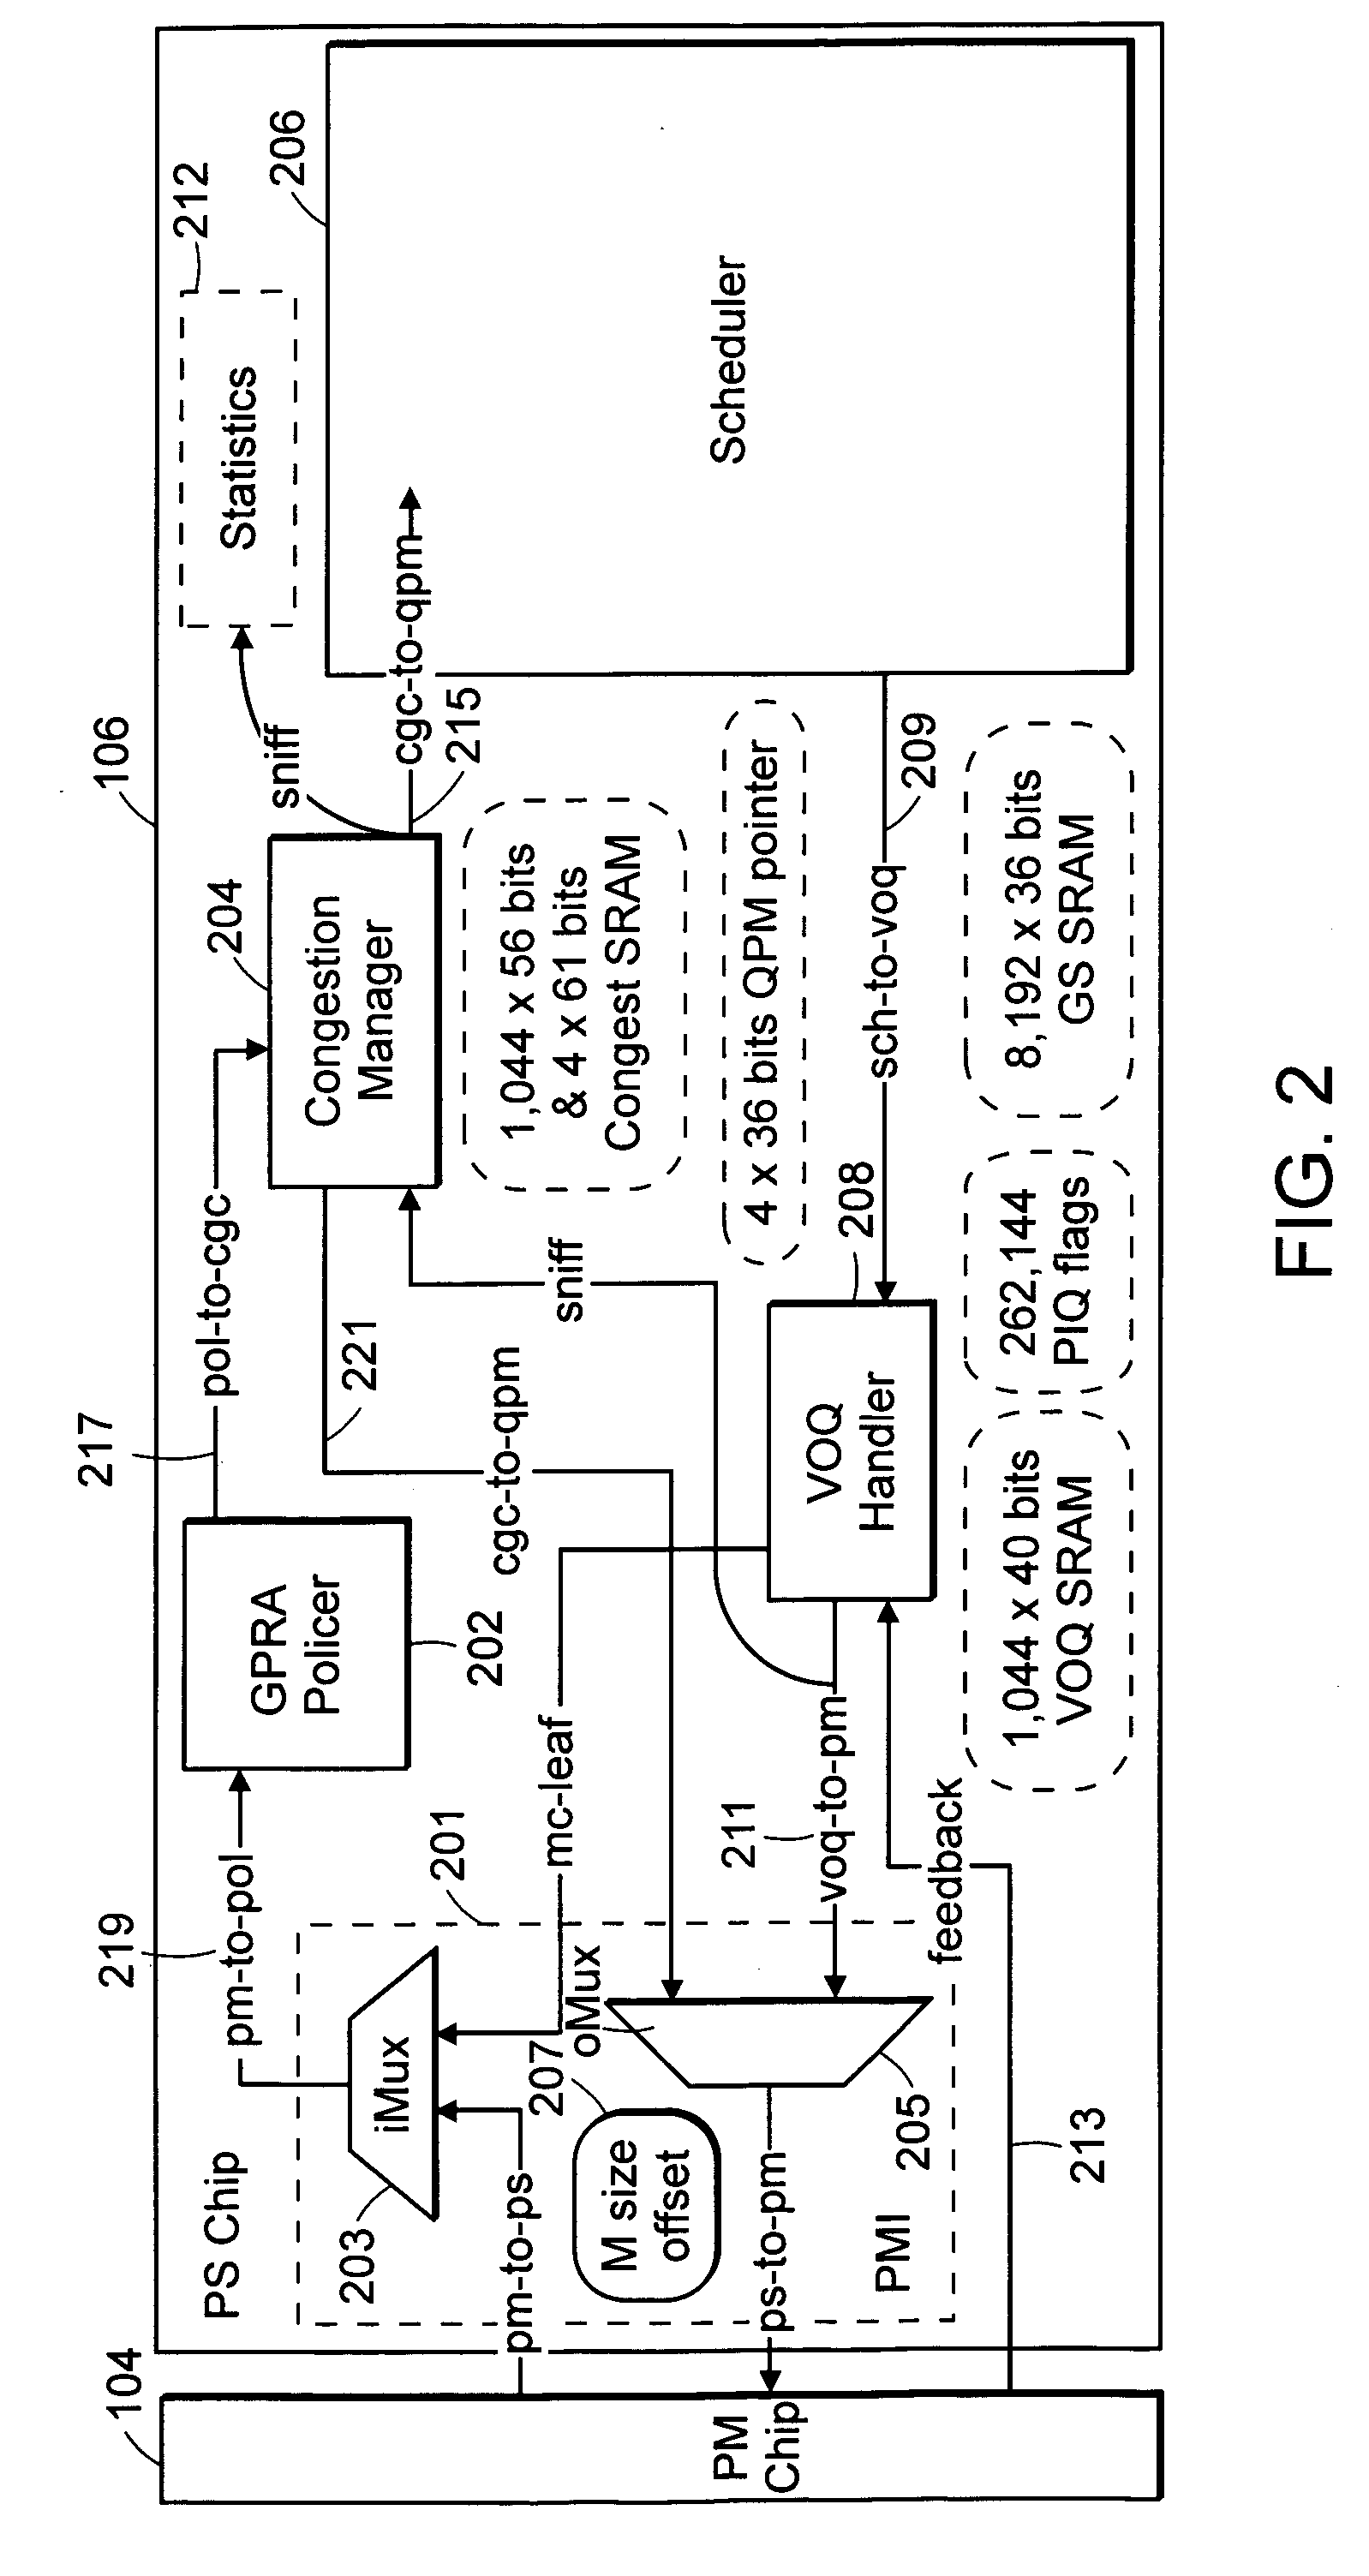 Configuration of congestion thresholds for a network traffic management system